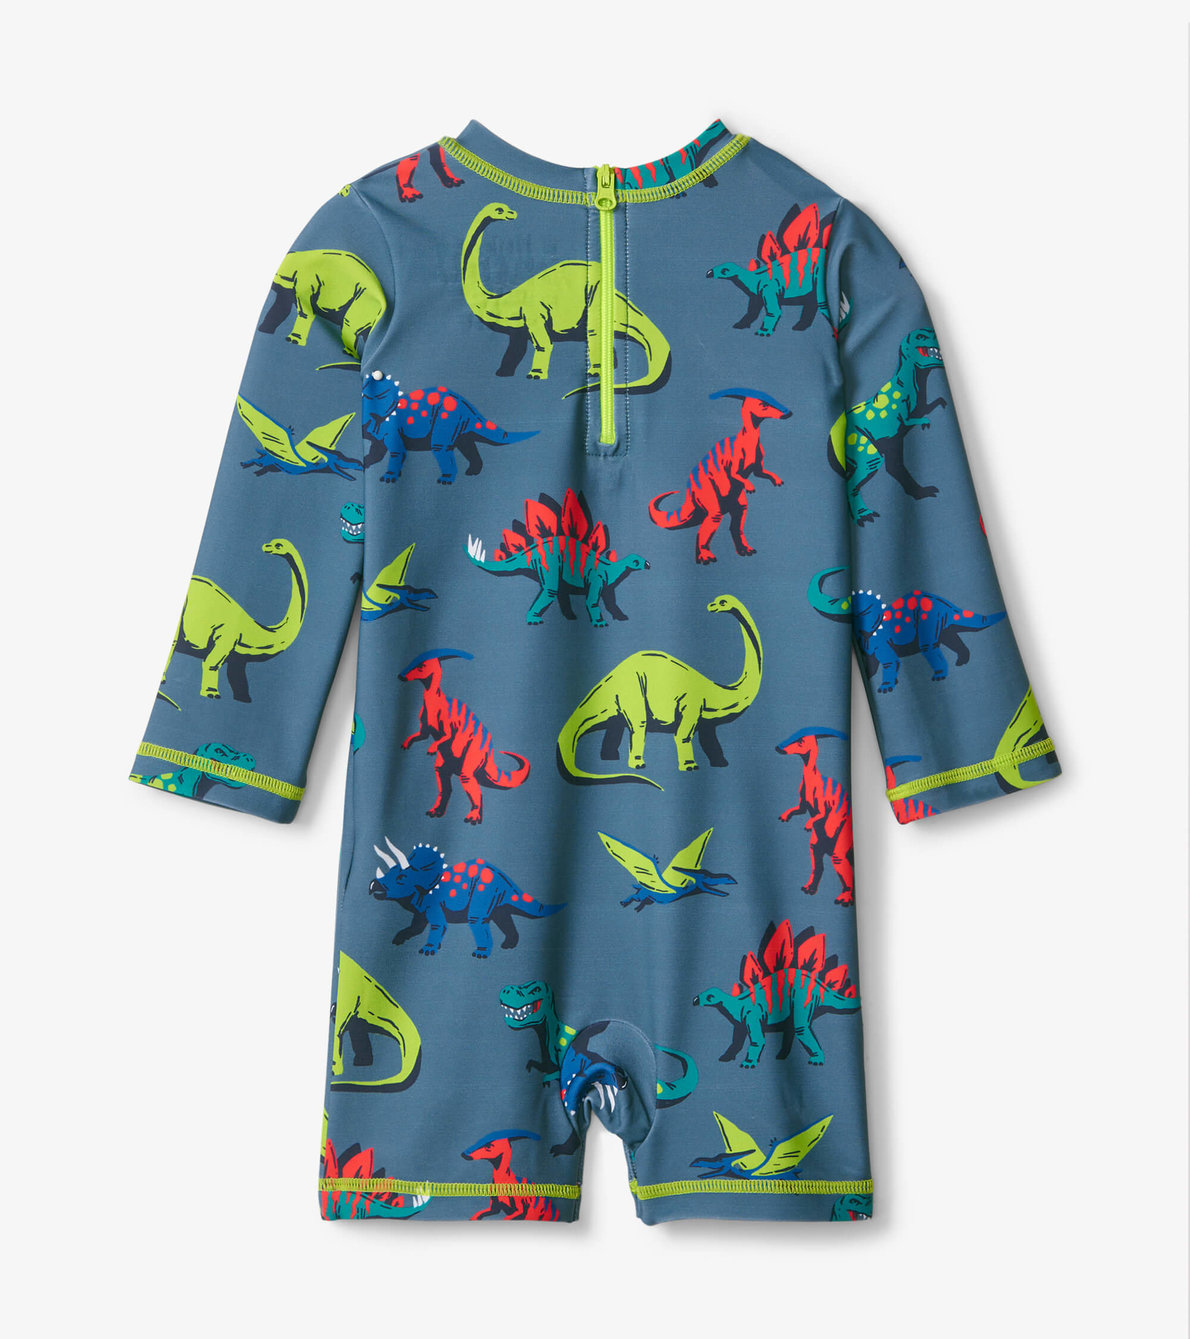 View larger image of Dangerous Dinos Baby One-Piece Rashguard